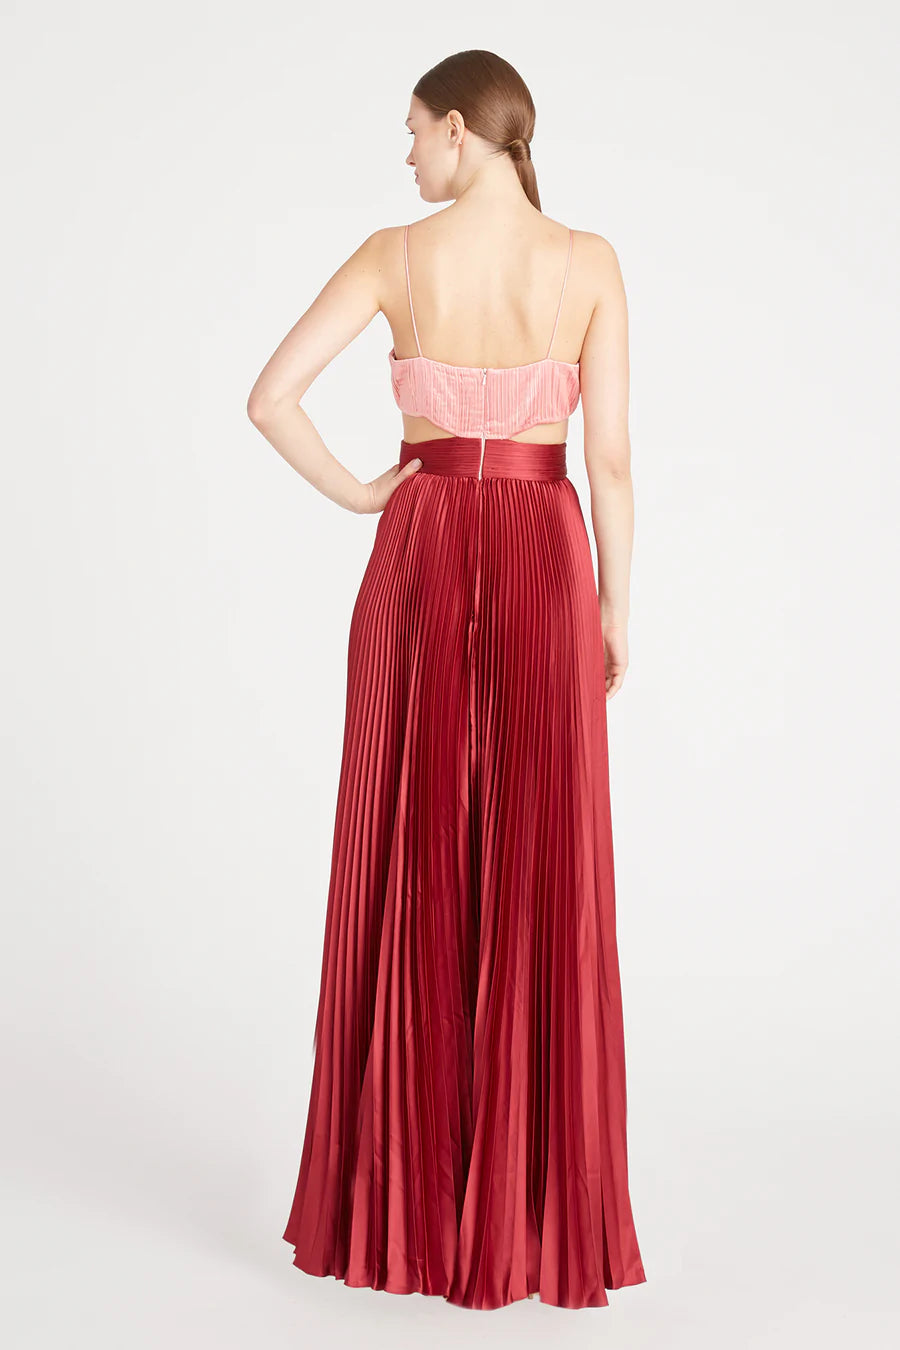 Amur Elodie Pleated Cutout Gown in Peachy Apricot/Red Ochre